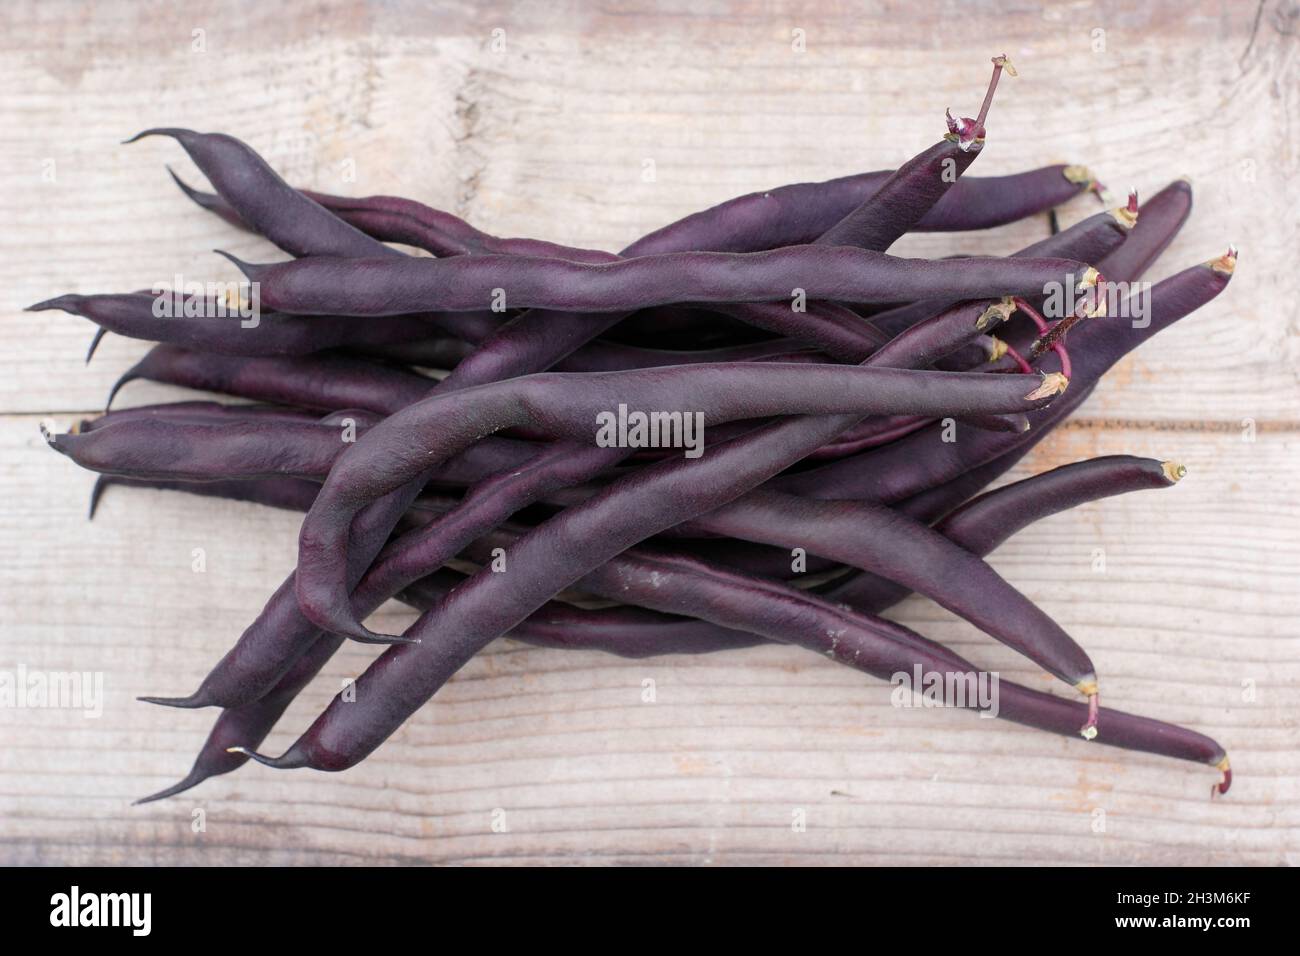 Phaseolus vulgaris. Freshly picked purple climbing beans on a wooden table. UK Stock Photo